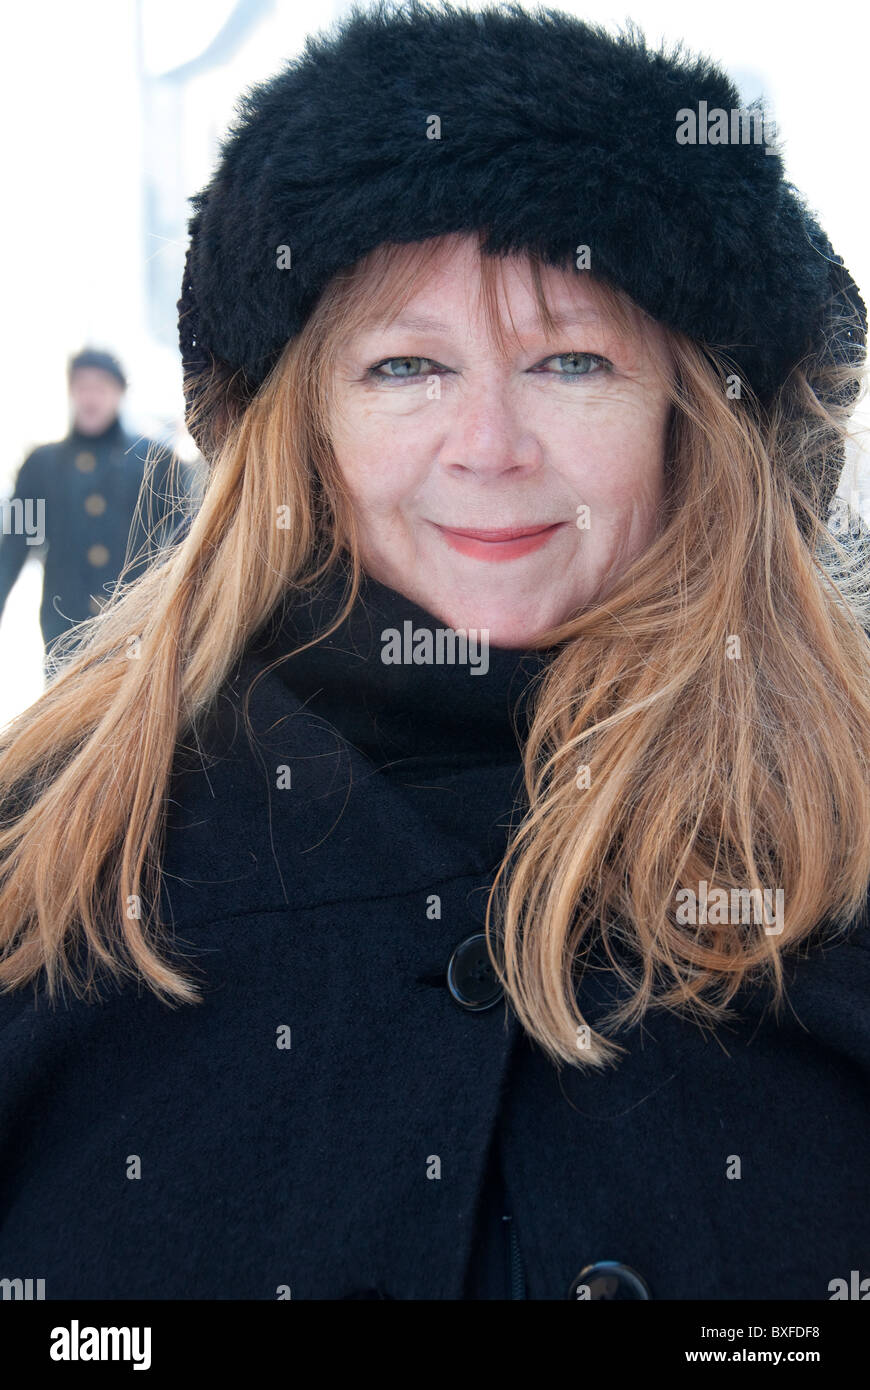 mature woman looking pleased in a black furn hat in the snow. Stock Photo